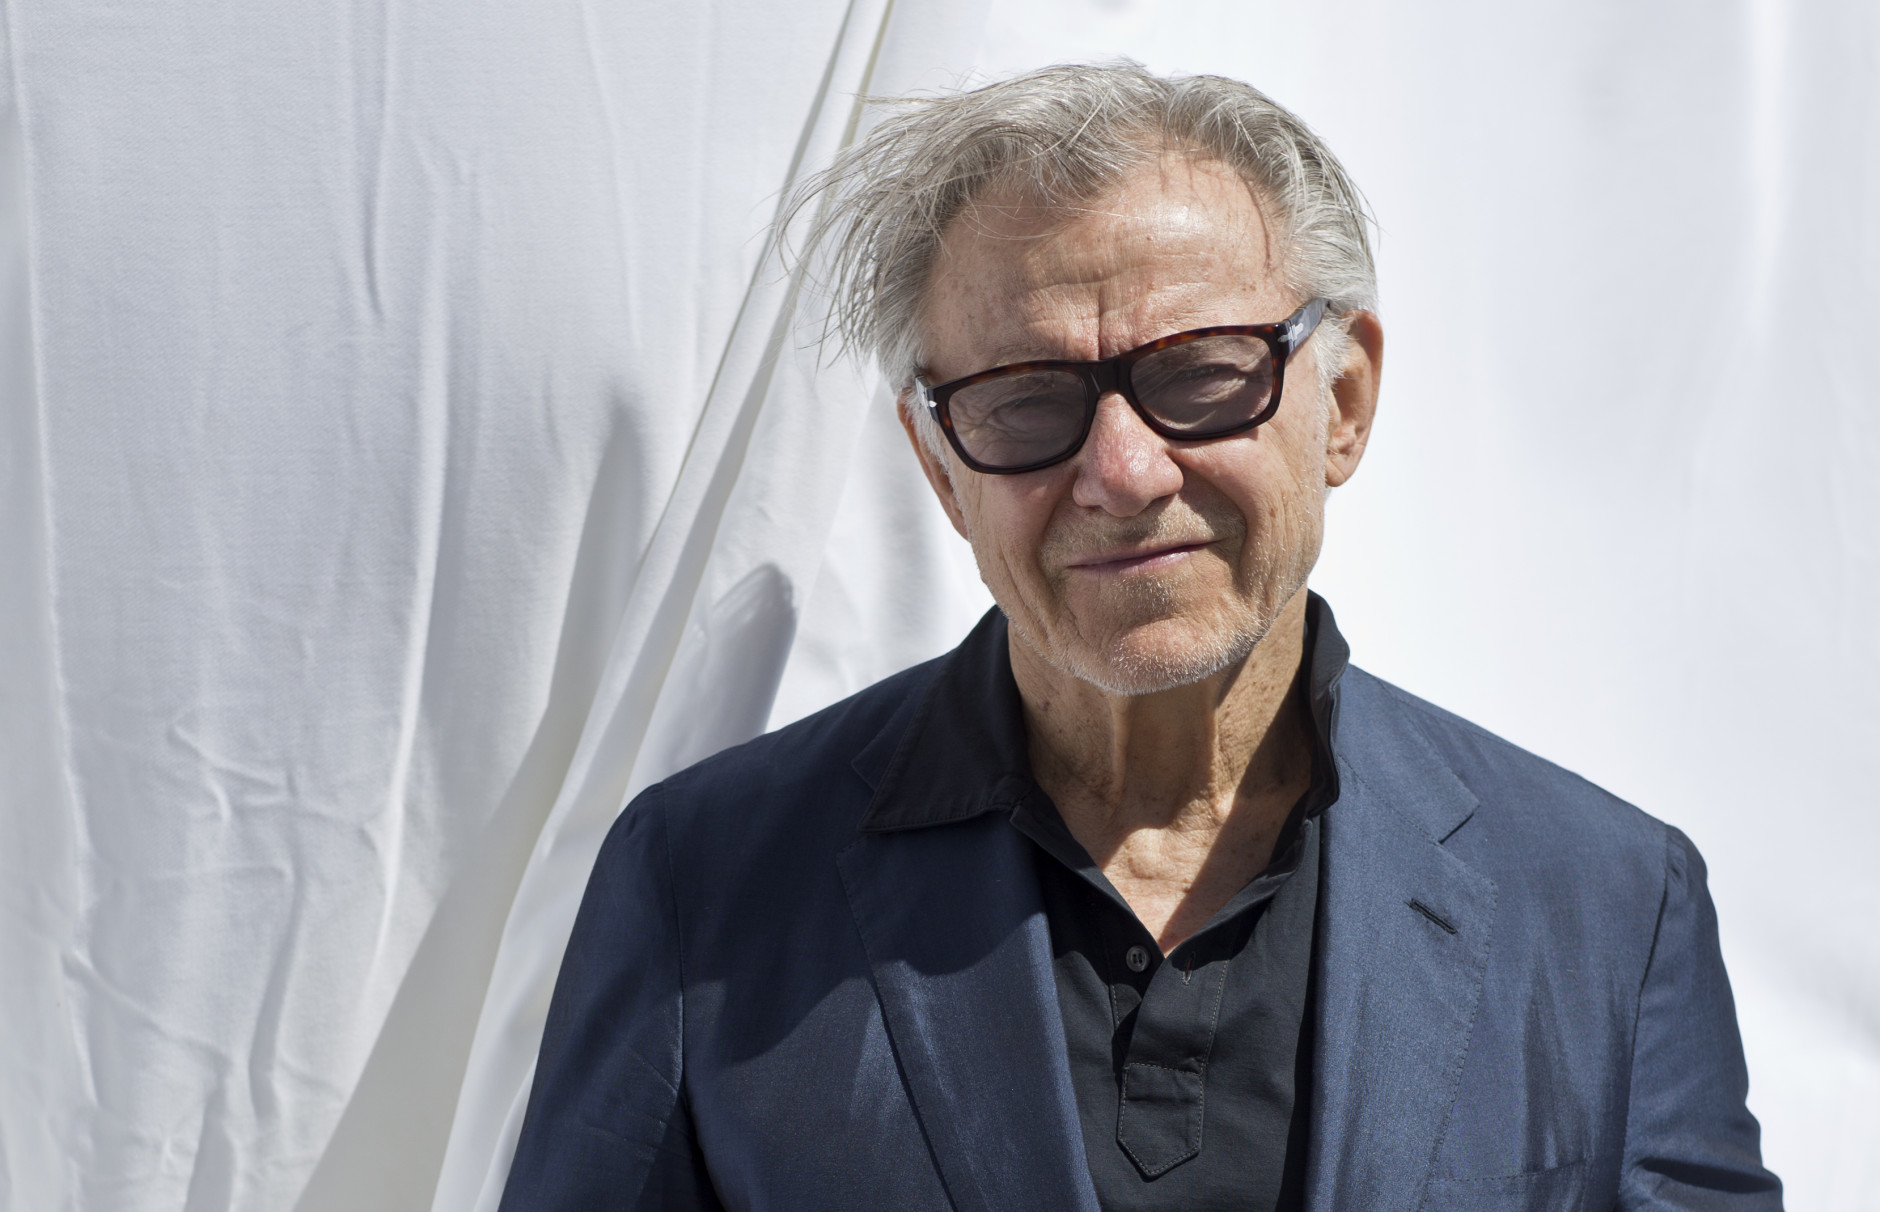 Actor Harvey Keitel poses for a photograph to promote the film Youth, at the 68th international film festival, Cannes, southern France, Wednesday, May 20, 2015. (AP Photo/Thibault Camus)